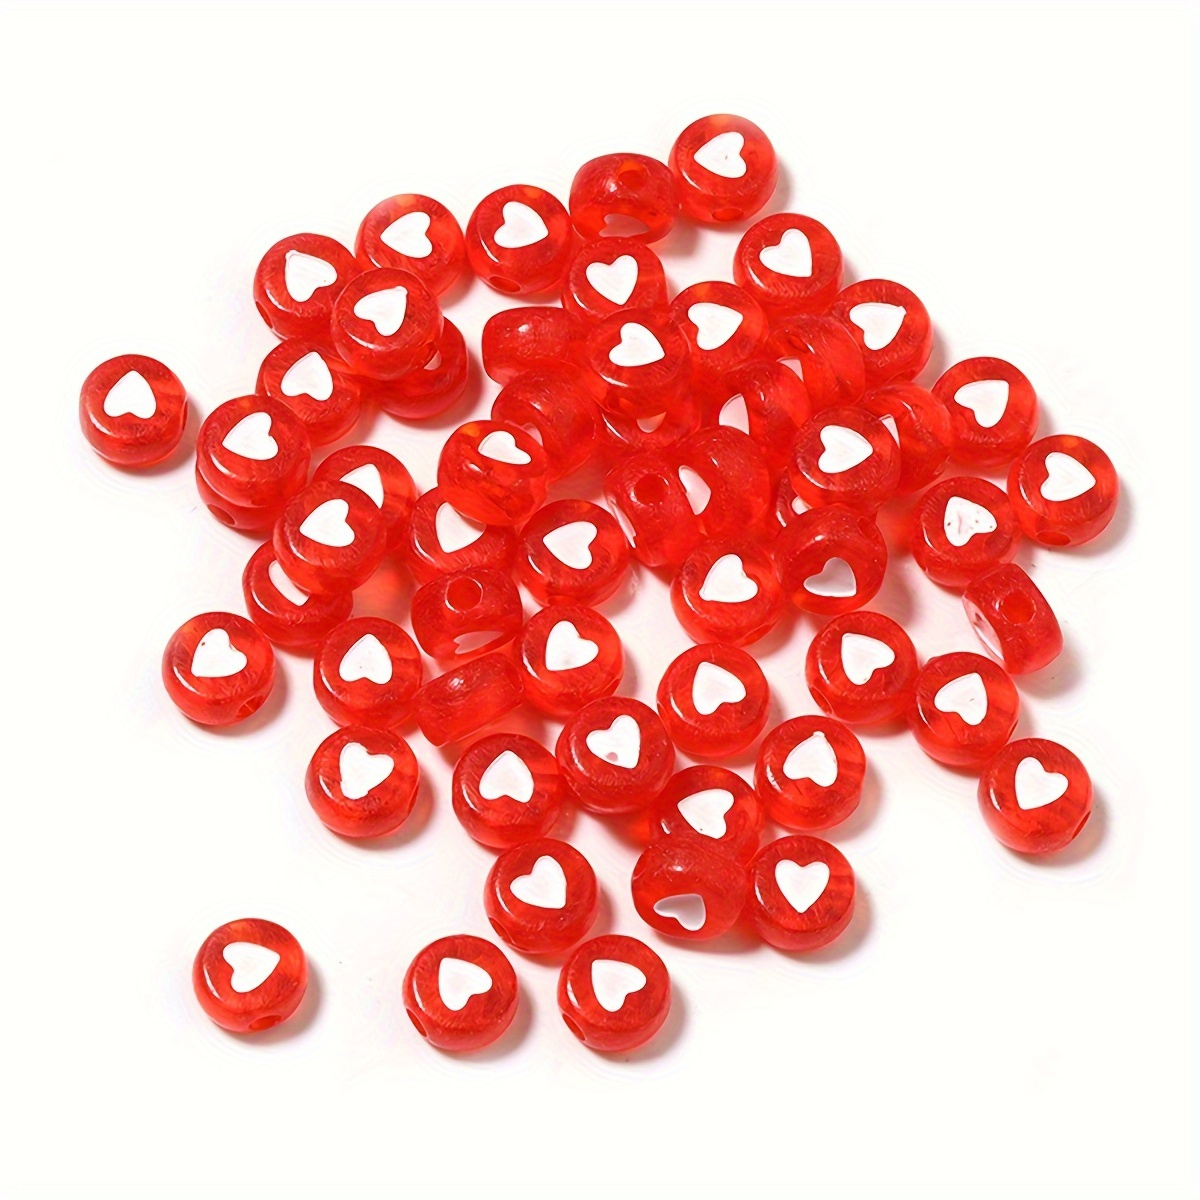 Colored Charm Marble Pattern Love Heart Beads Acrylic Spacer Bead 15x17mm  20pcs Acrylic Beads For Jewelry Making DIY Accessories